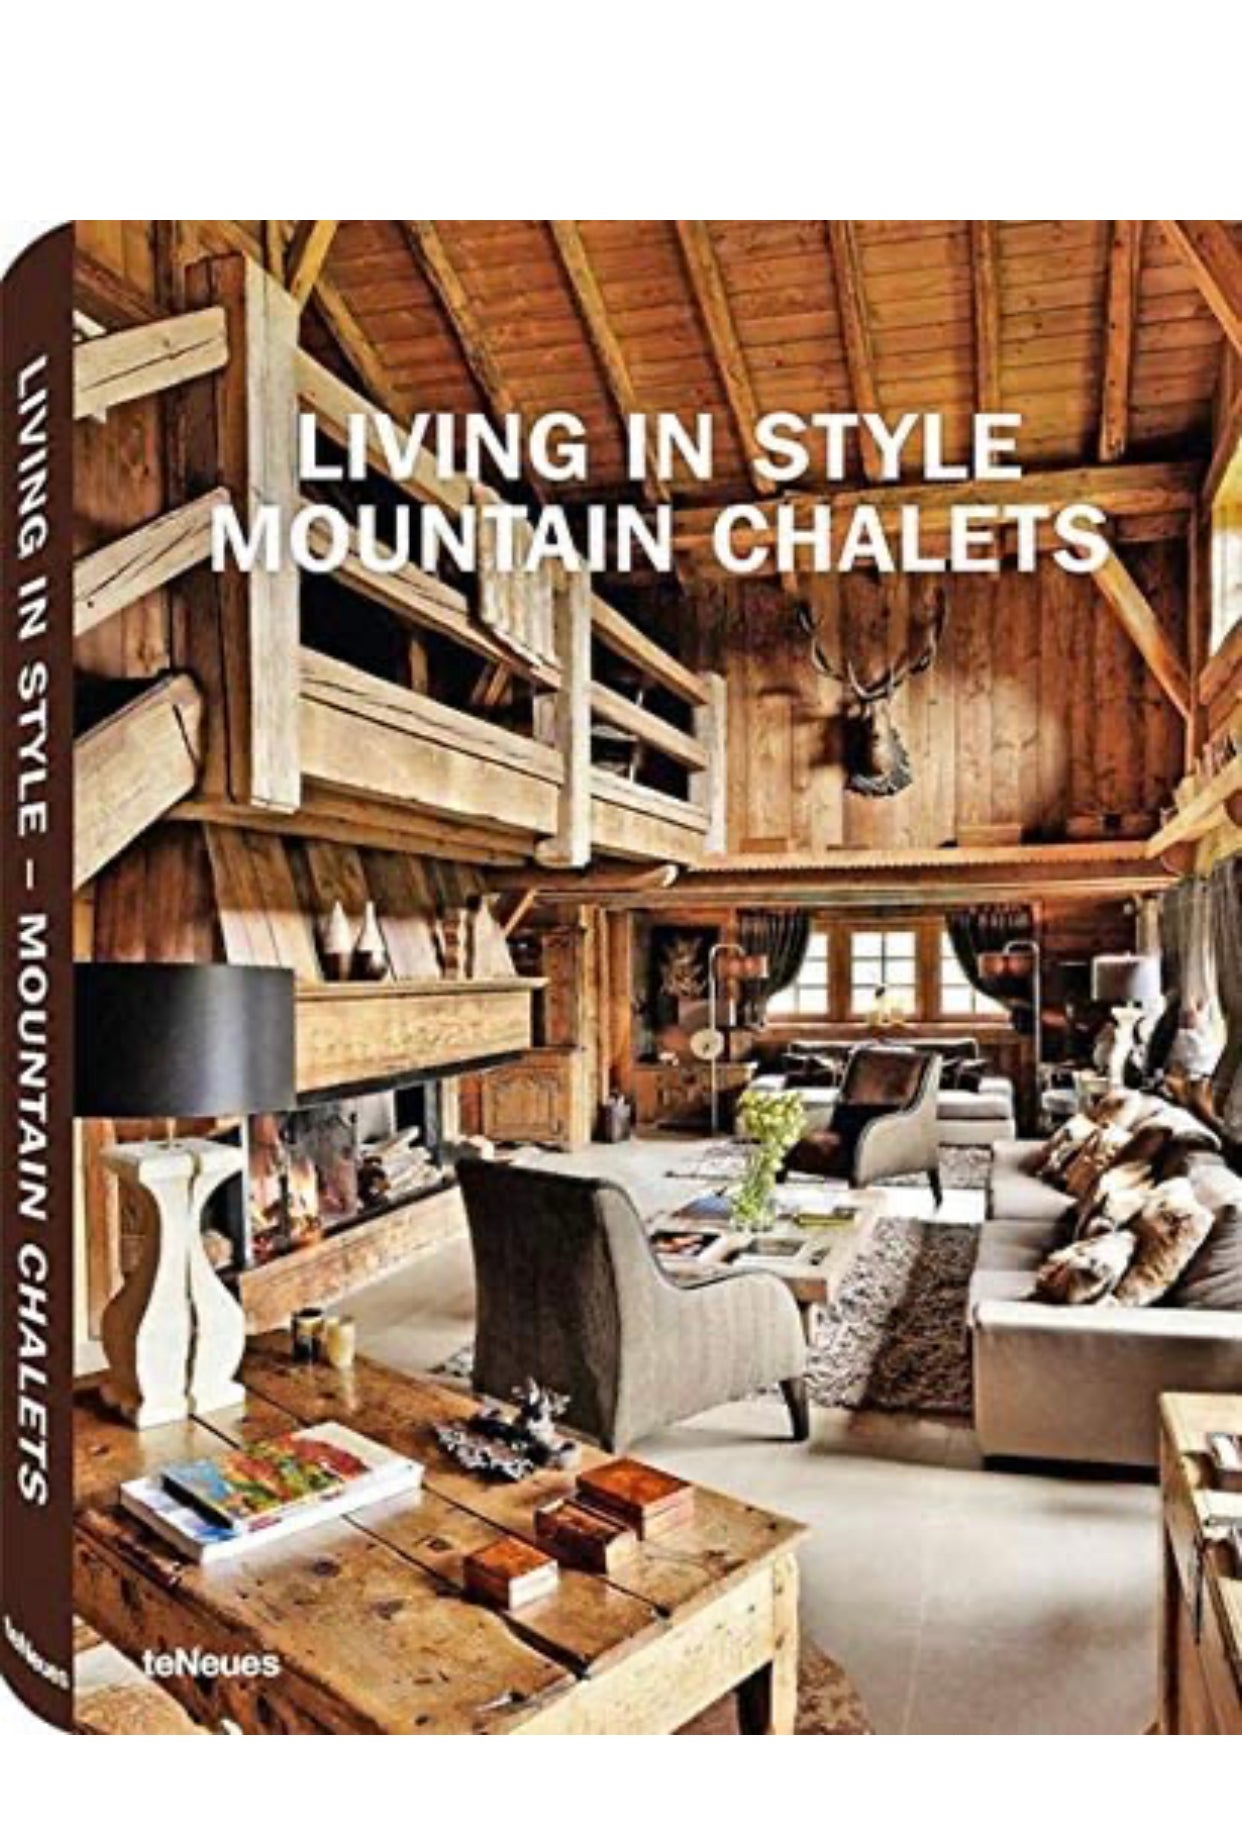 Living in Style Mountain Chalets